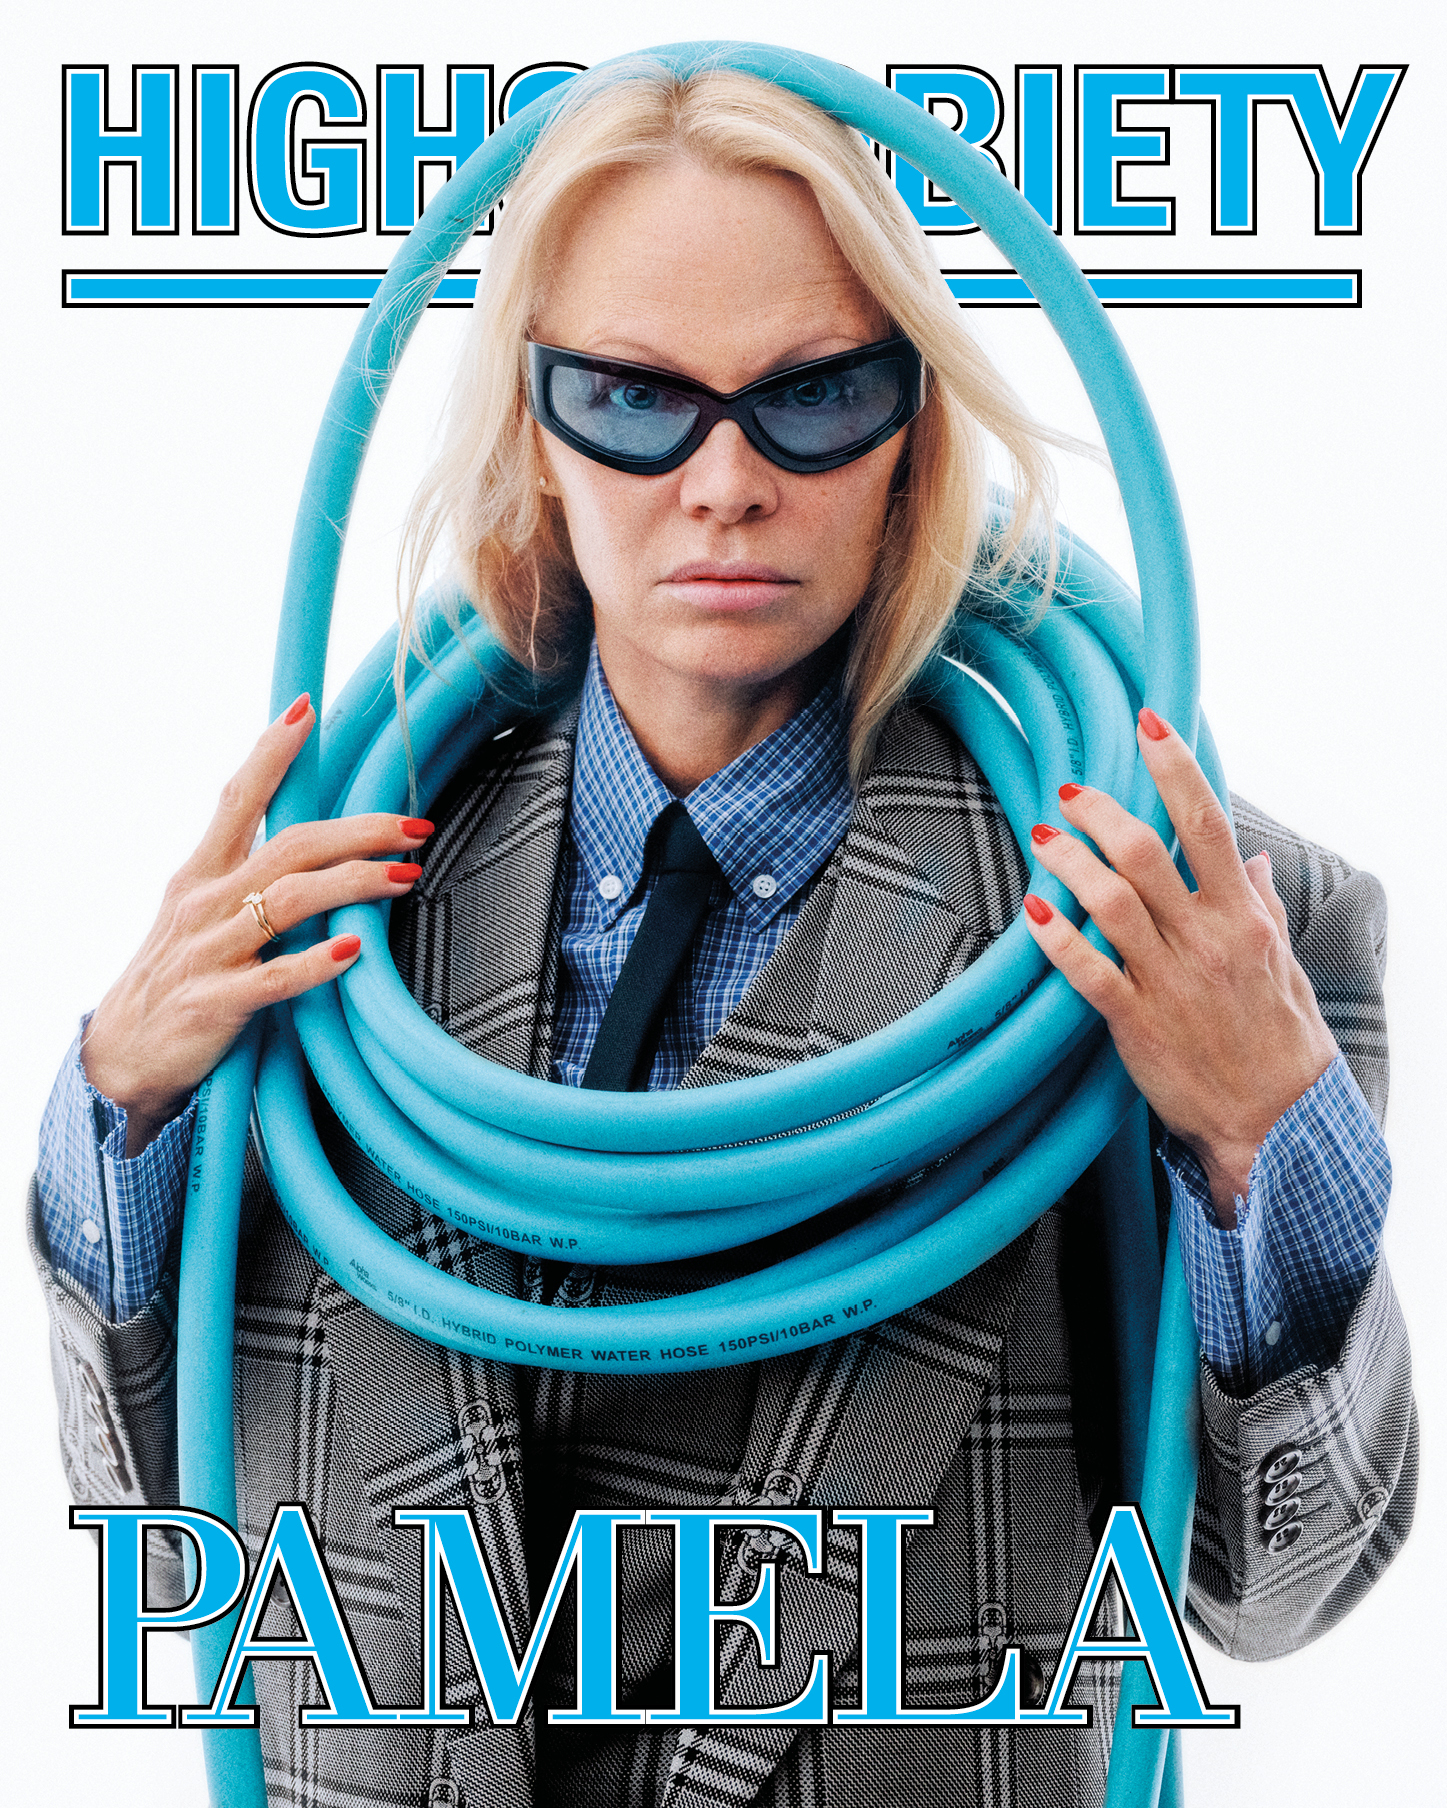 Pammy also wraps a blue hose round her neck for Highsnobiety mag’s cover